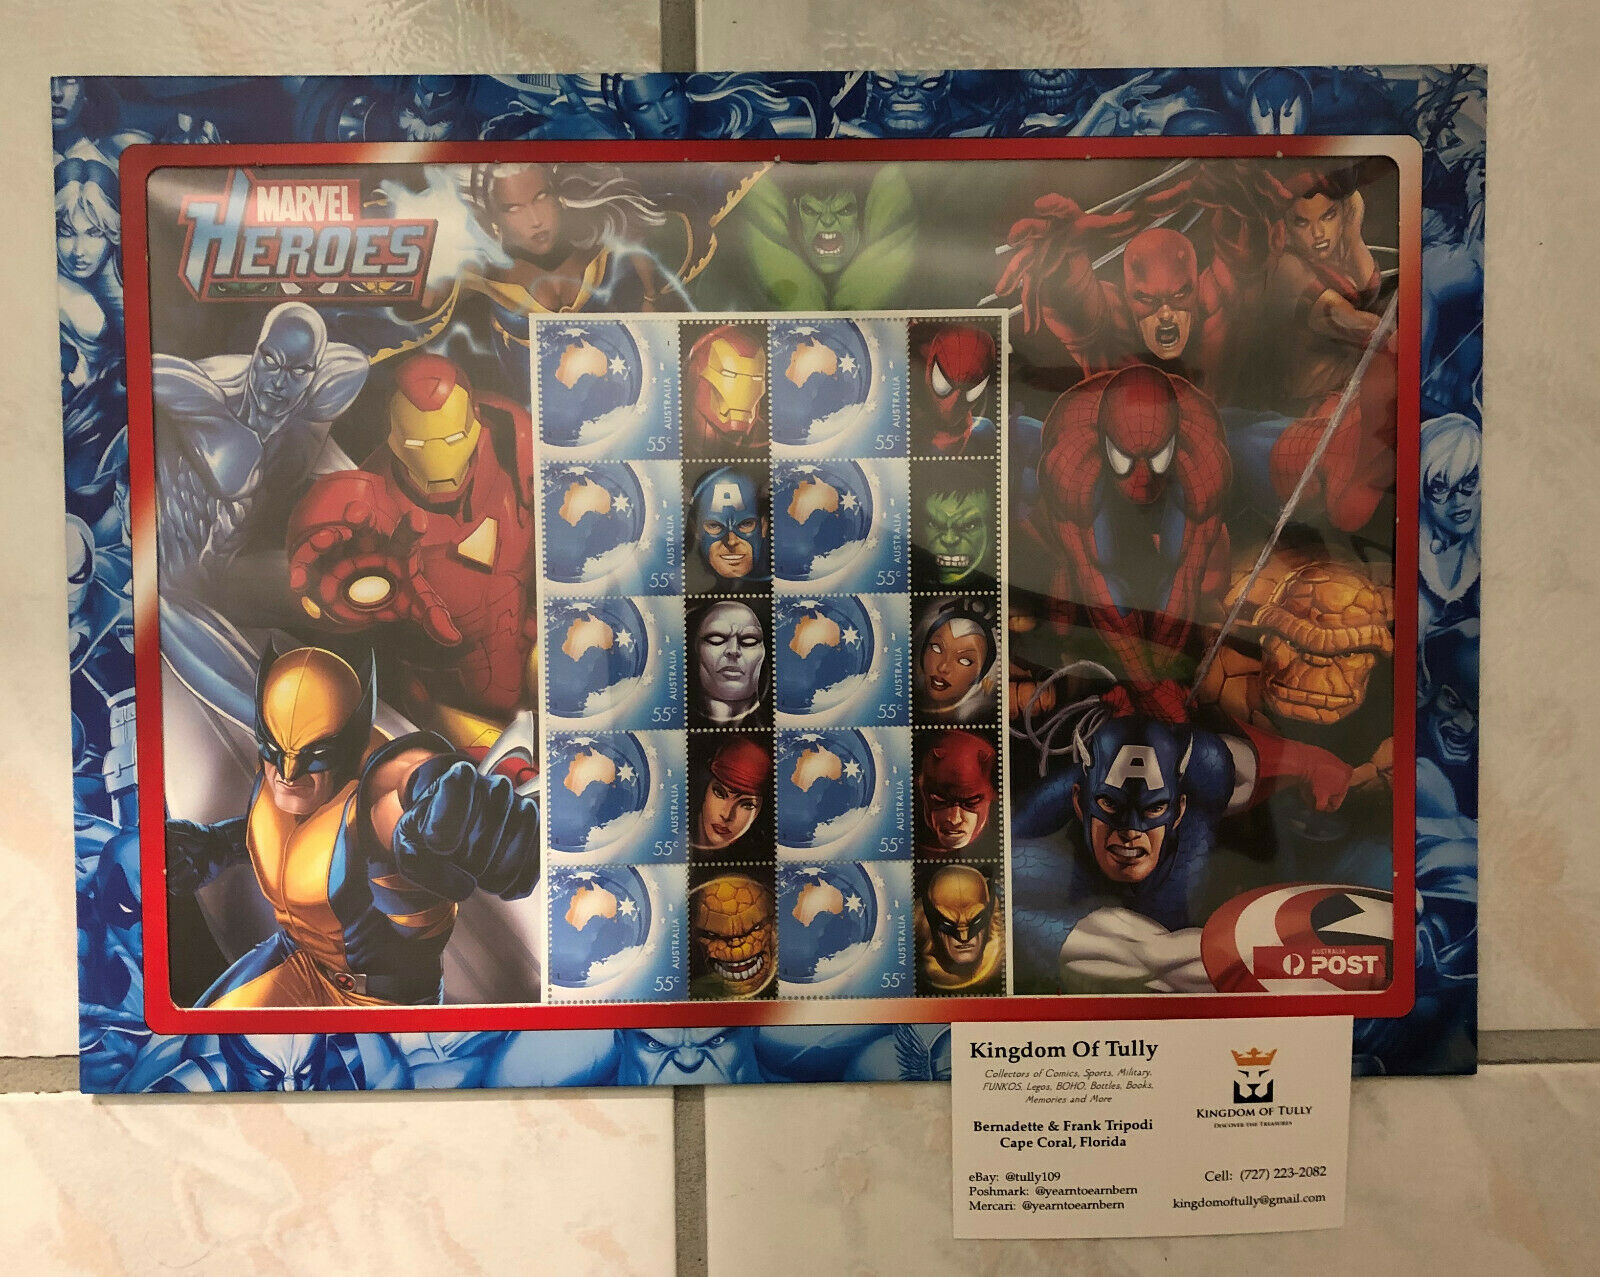 Marvel Heroes Special Events Sheetlet Brand New Still In Packet. Mint